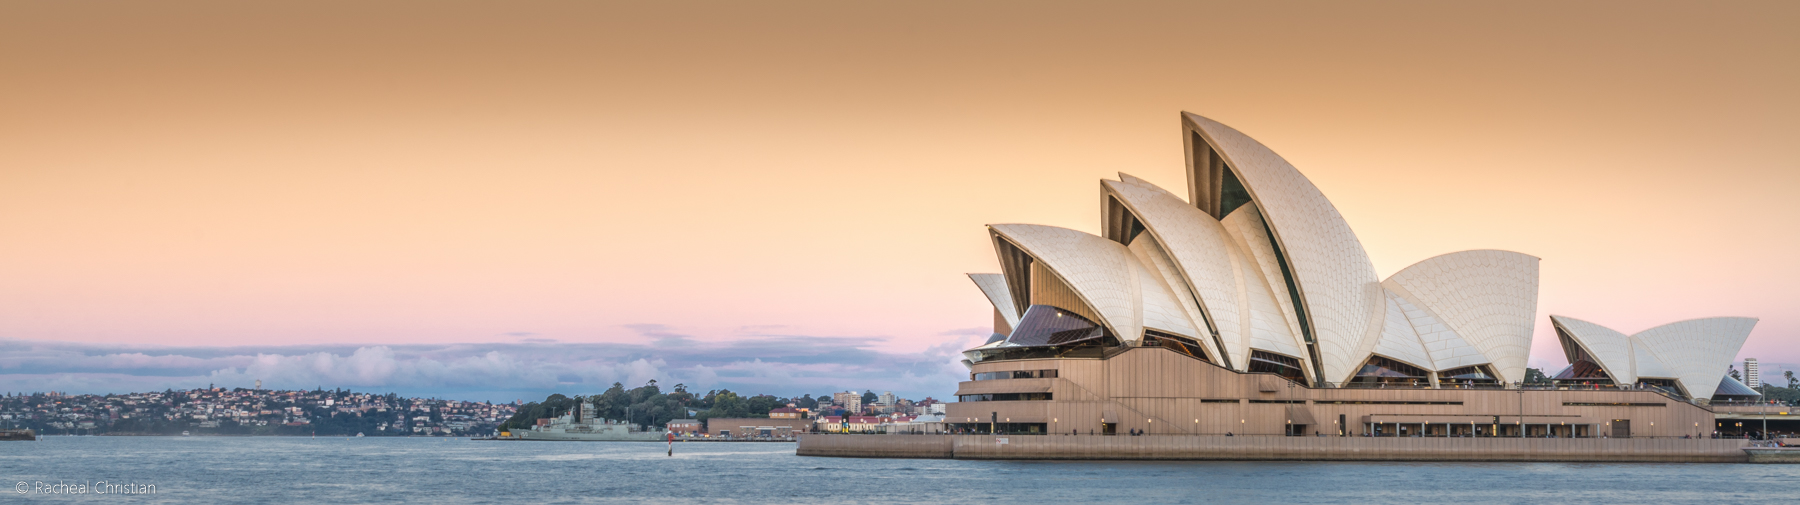 Photographing Sydney | A Night At The Rocks by Racheal Christian - Sydney Opera House Panorama